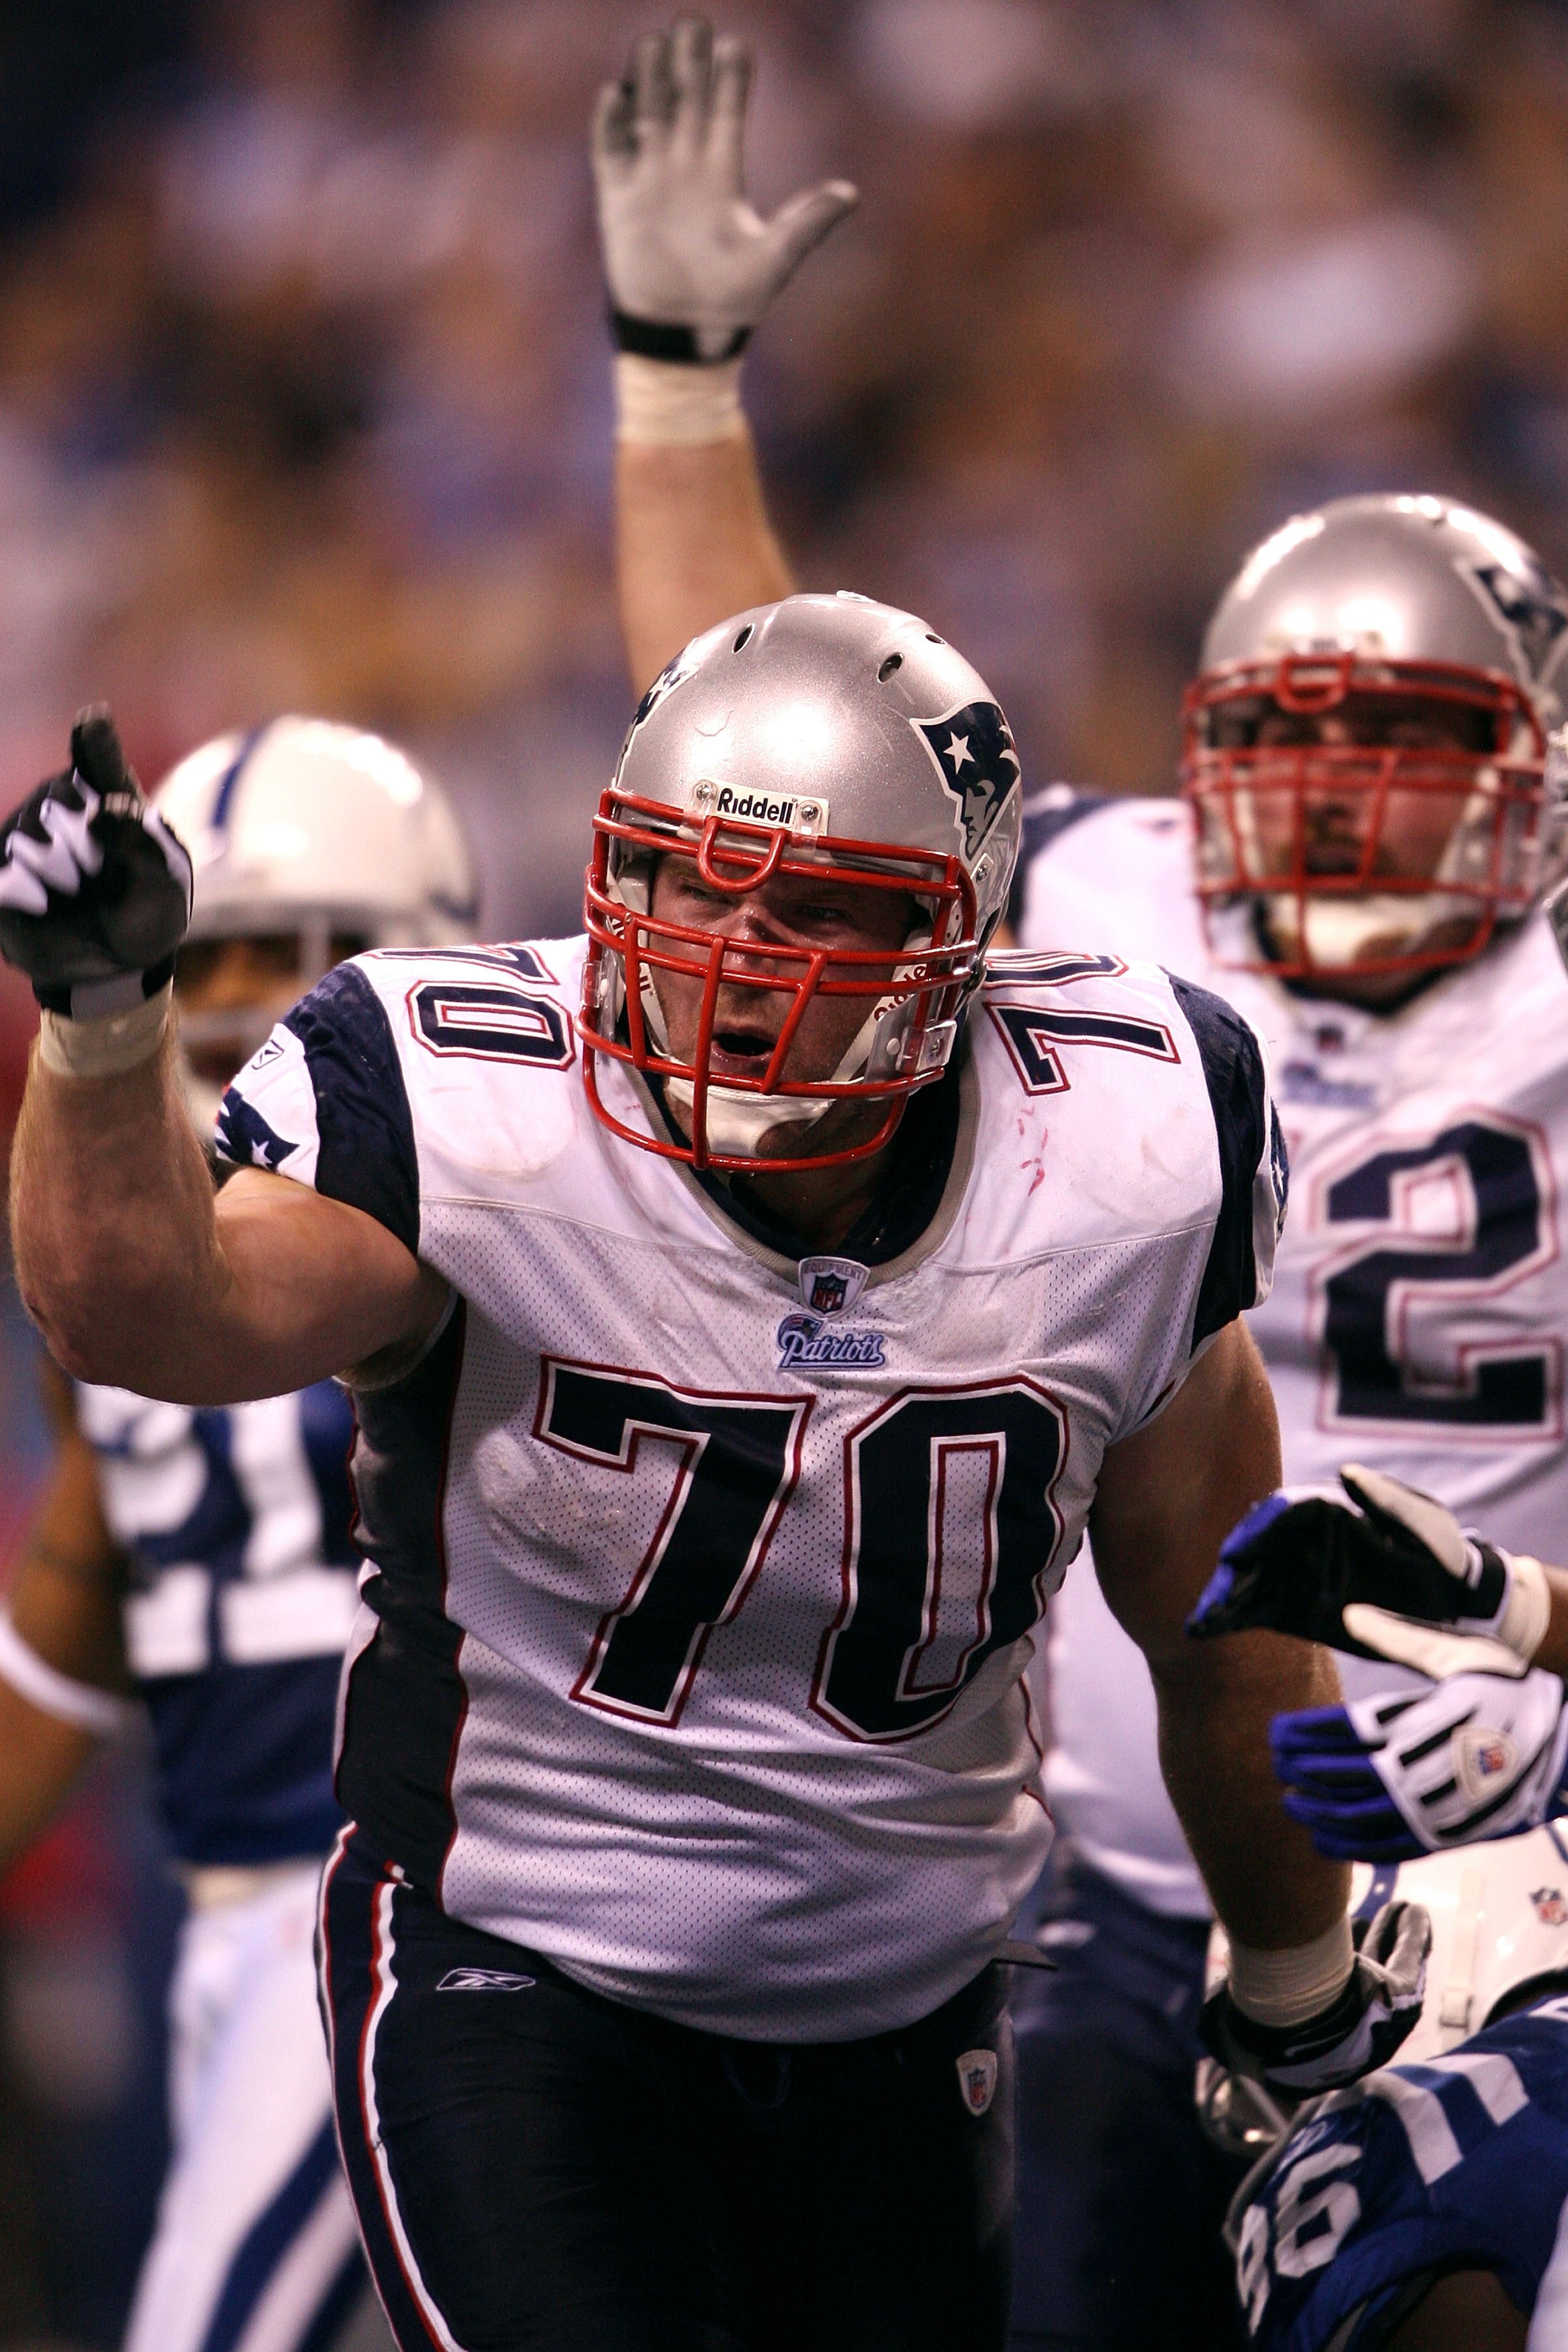 INDIANAPOLIS - NOVEMBER 02:  Logan Mankins #70 of the New England Patriots reacts after BenJarvus Green-Ellis #42 scored a 6-yard rushing touchdown in the third quarter against the Indianapolis Colts at Lucas Oil Stadium on November 2, 2008 in Indianapoli